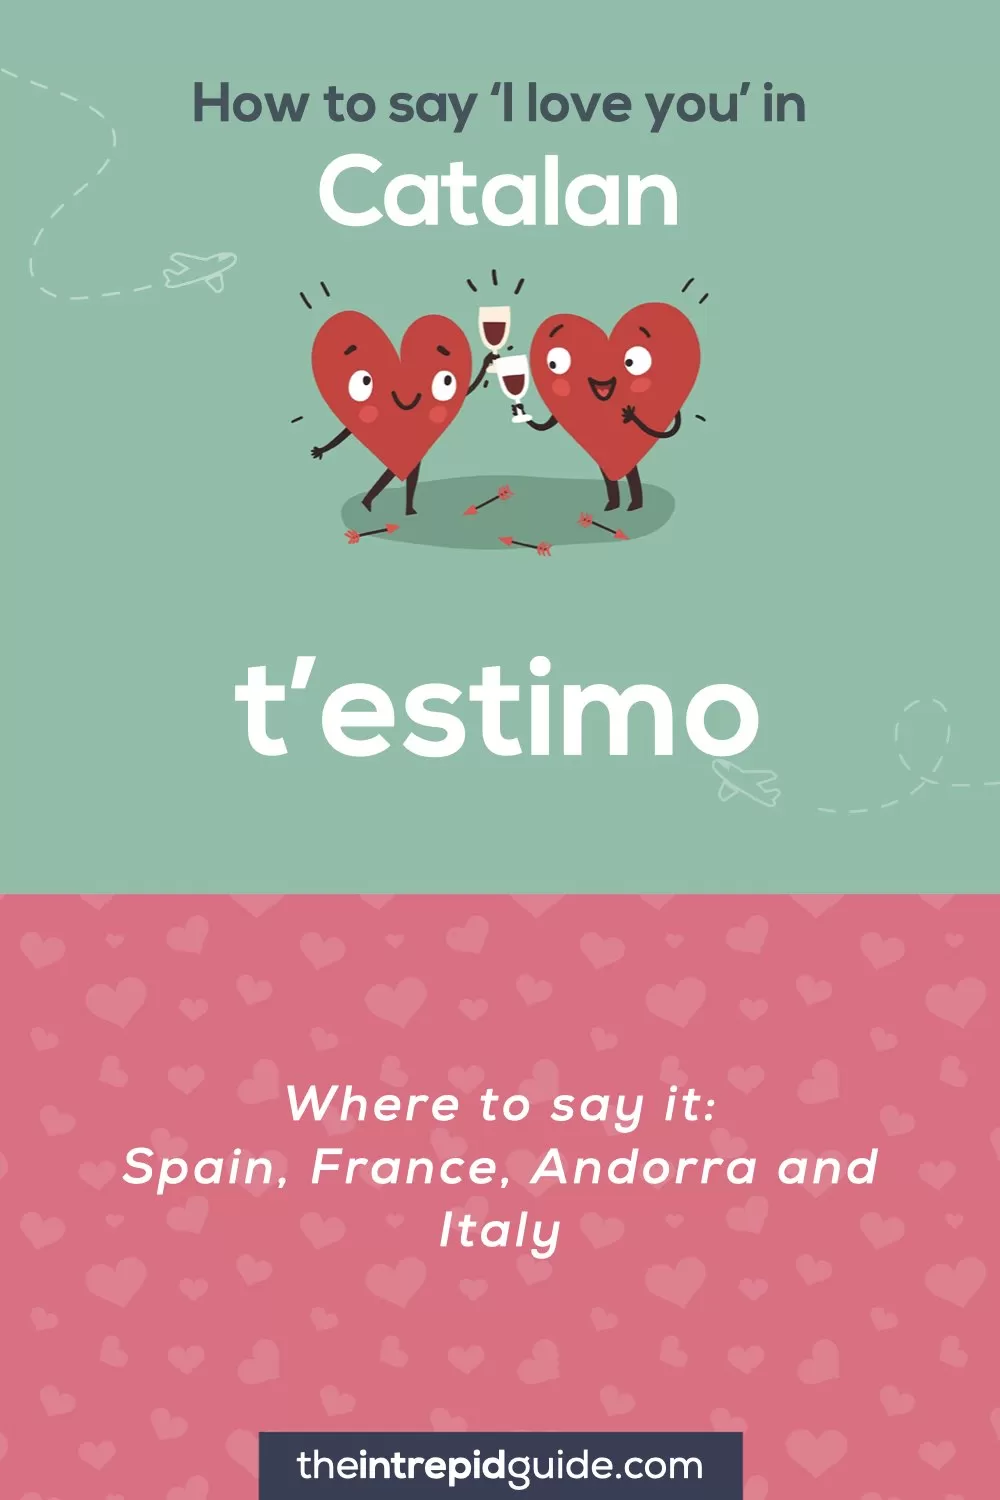 How to say I love you in different languages - Catalan - t’estimo